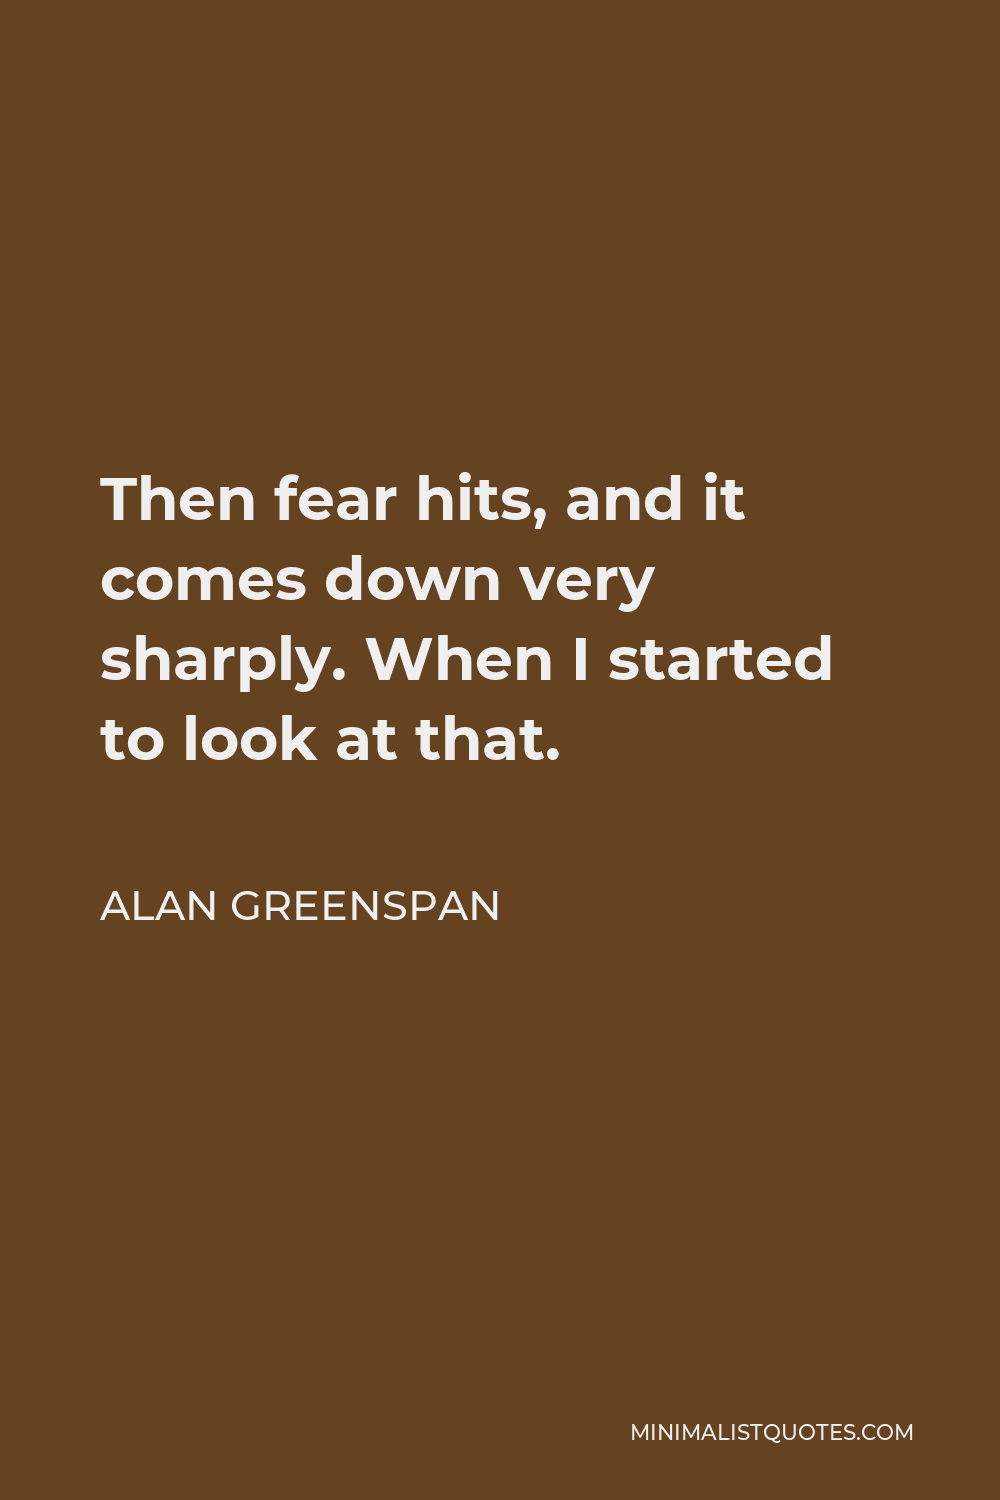 Alan Greenspan Quote - Then fear hits, and it comes down very sharply. When I started to look at that.